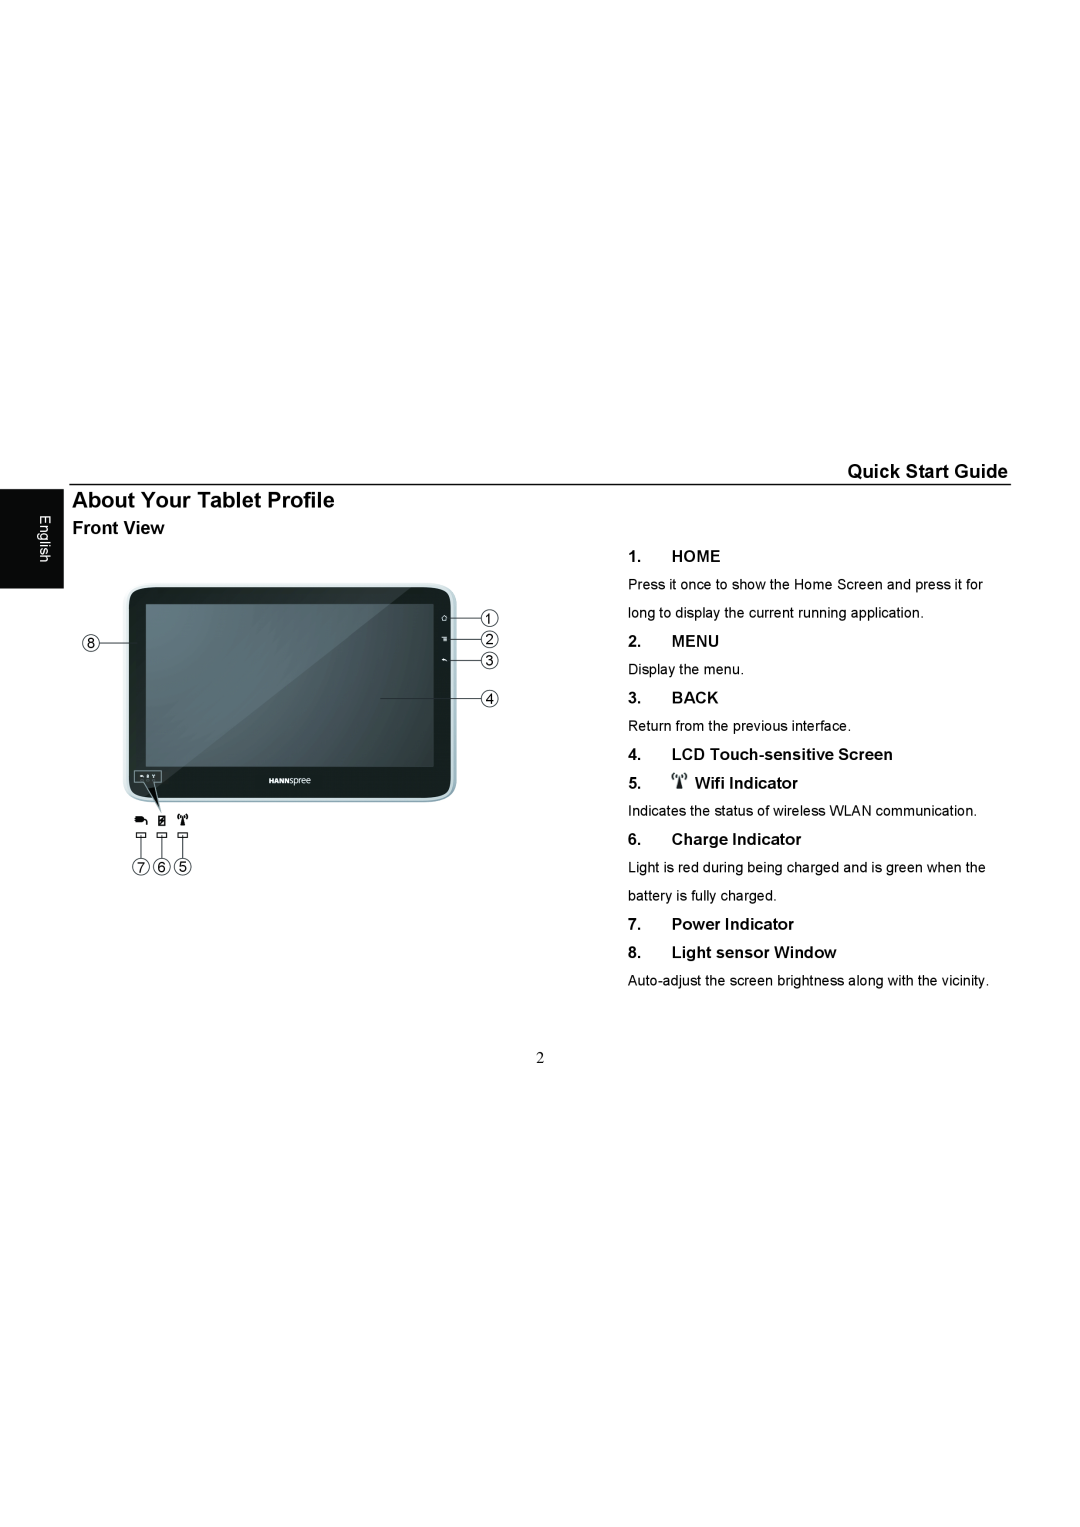 HANNspree SN10T1 About Your Tablet Profile, Quick Start Guide, Front View, Home, Menu, Back, LCD Touch-sensitive Screen 